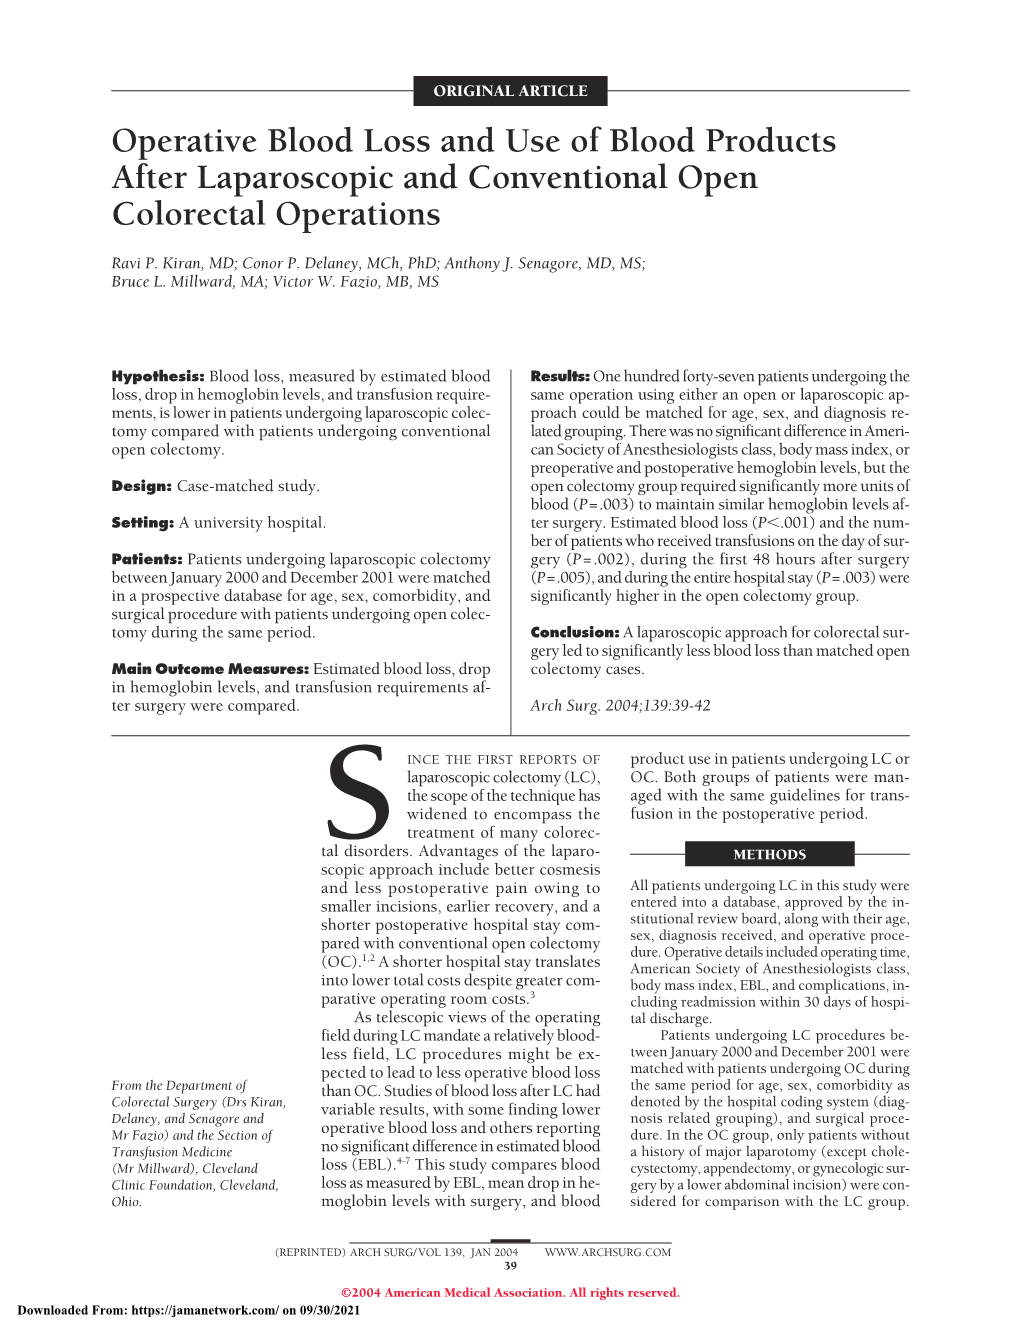 Operative Blood Loss and Use of Blood Products After Laparoscopic and Conventional Open Colorectal Operations